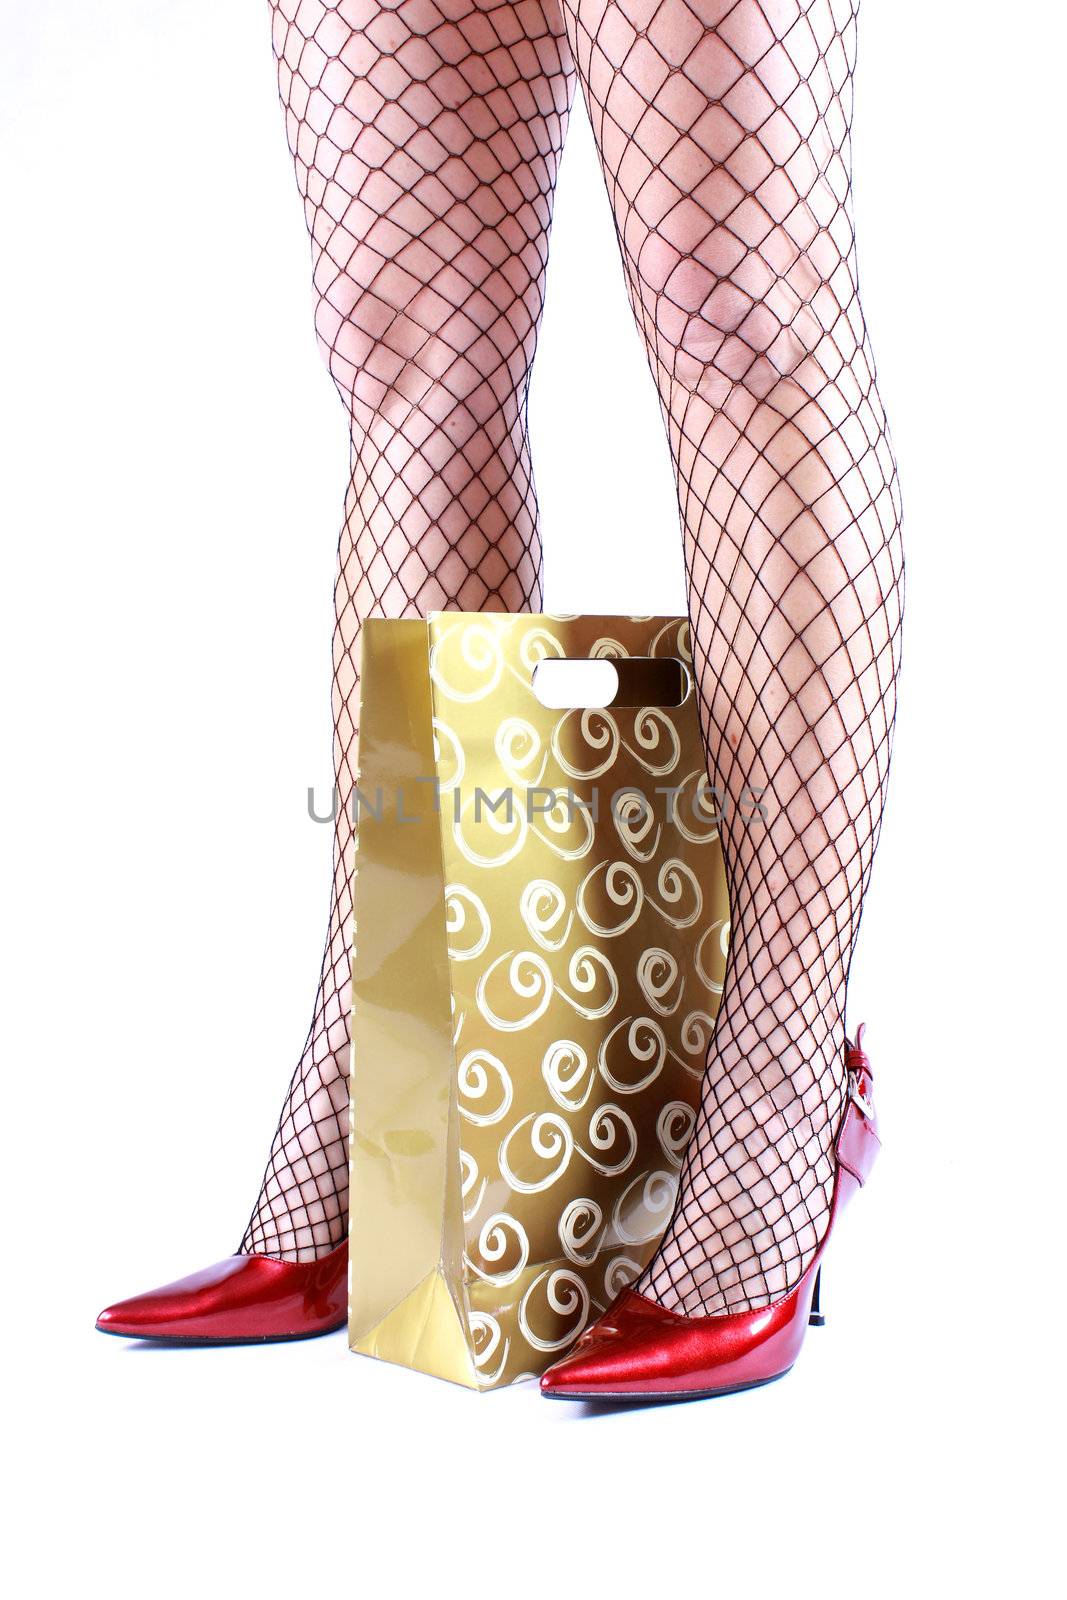 Beautiful legs in stockings and shopping bag on white background